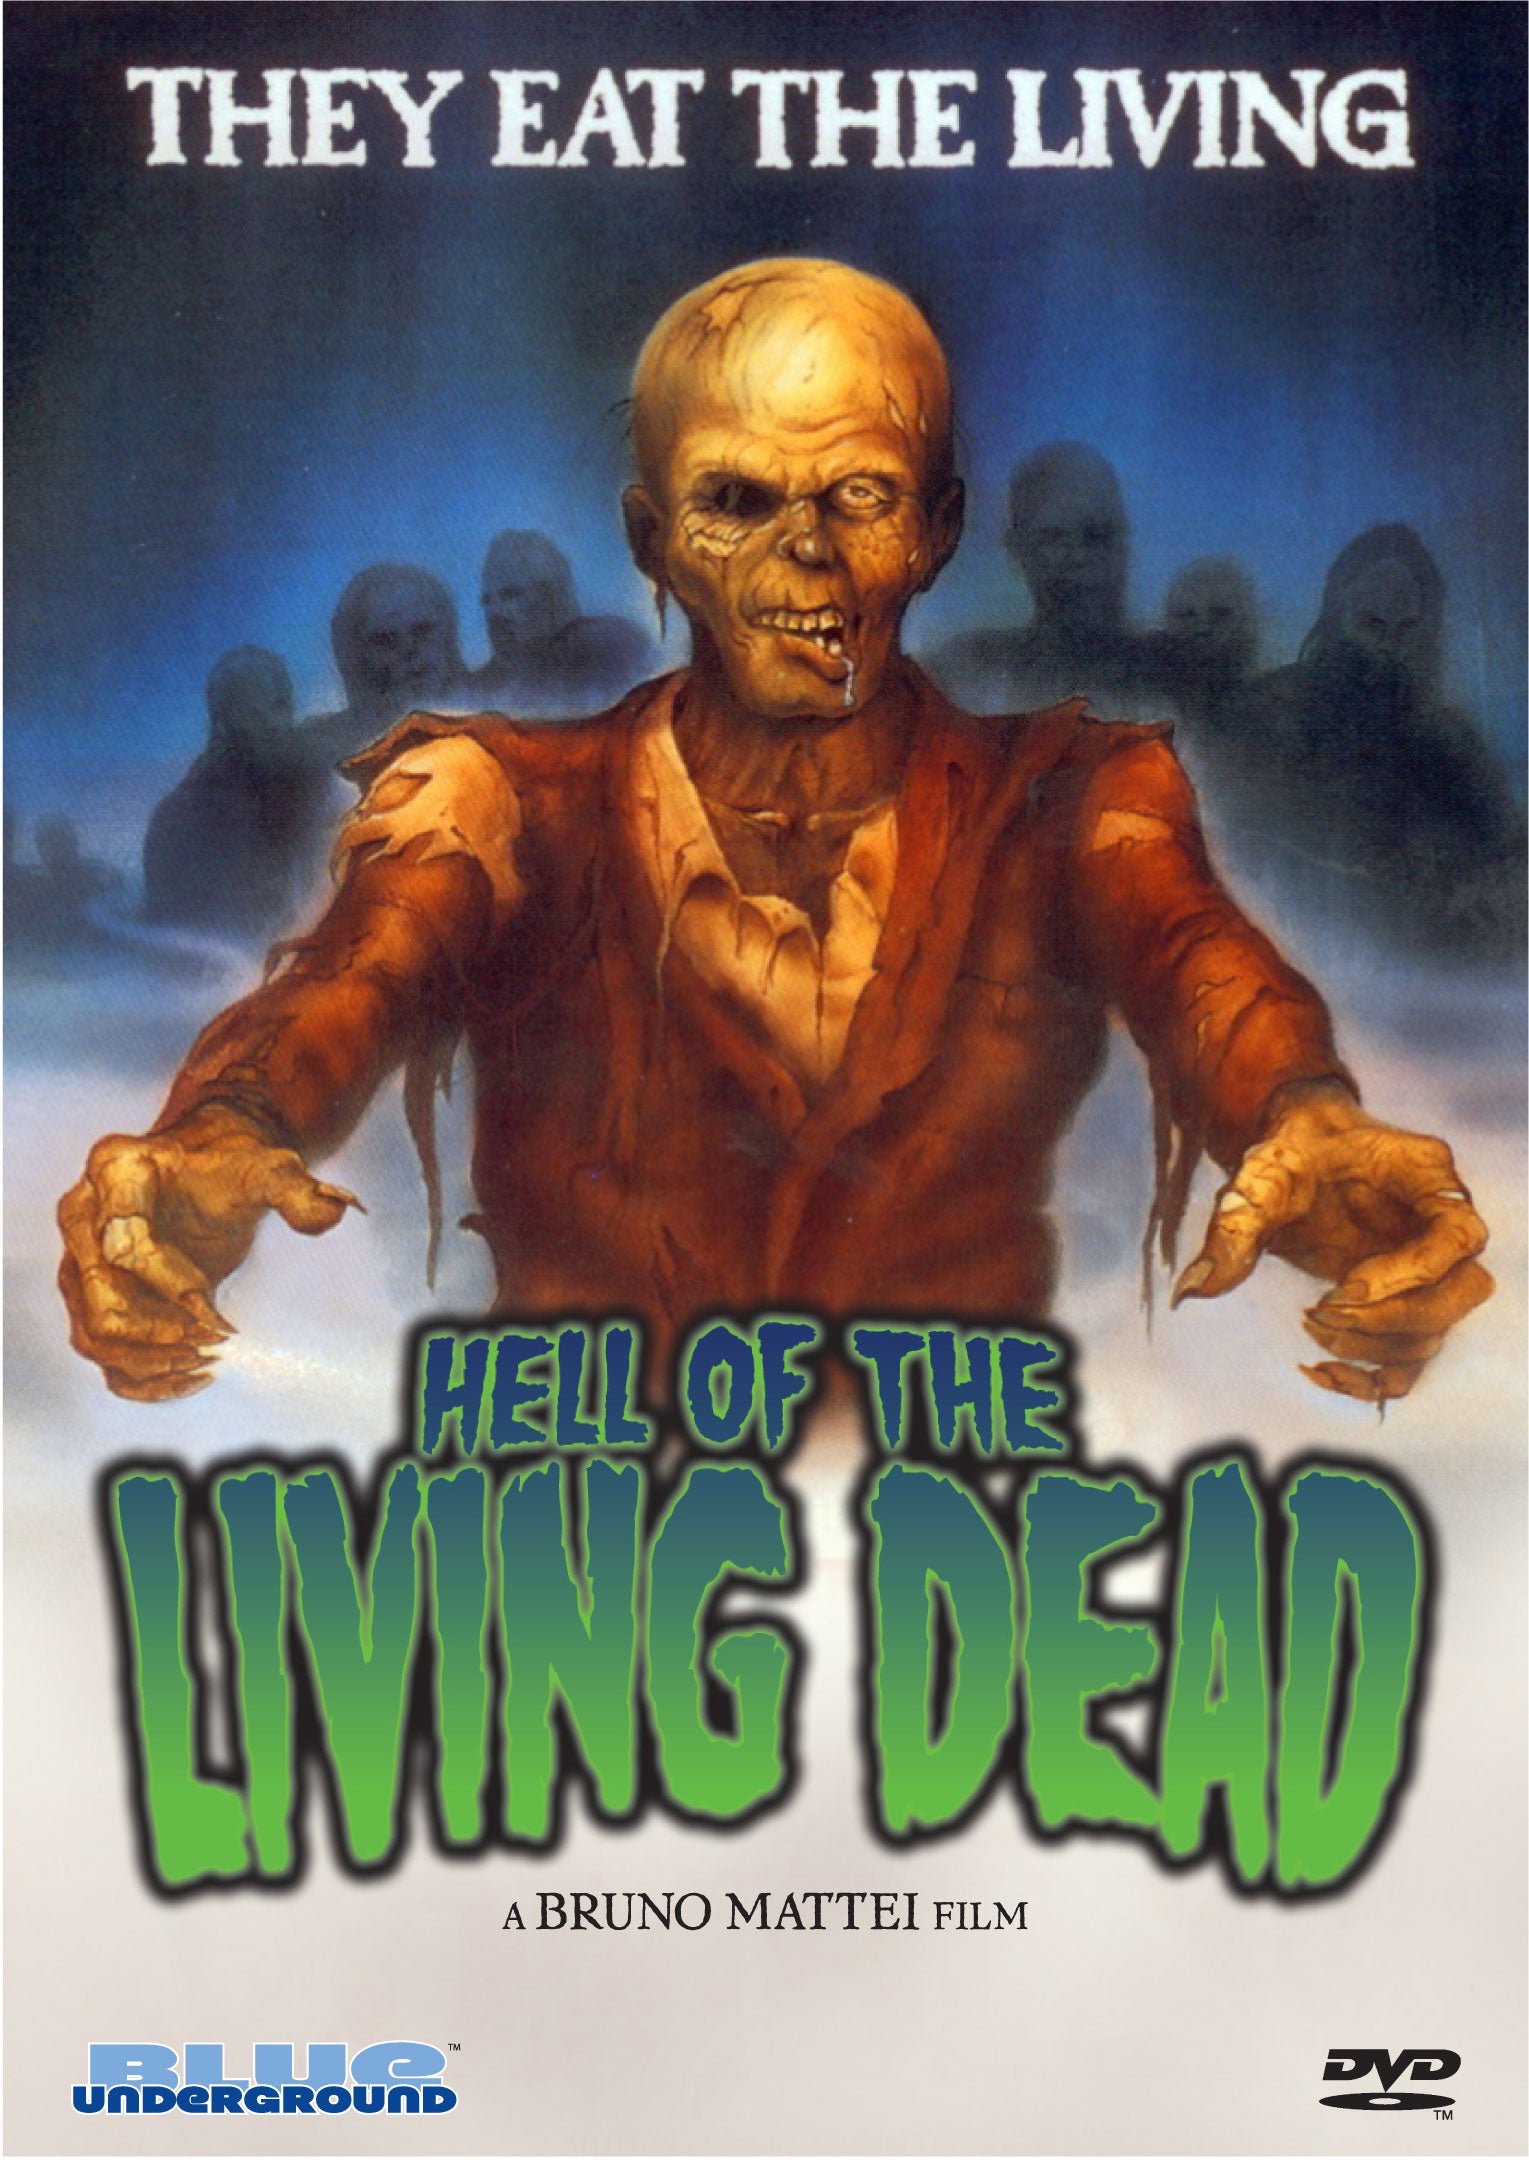 HELL OF THE LIVING DEAD DVD